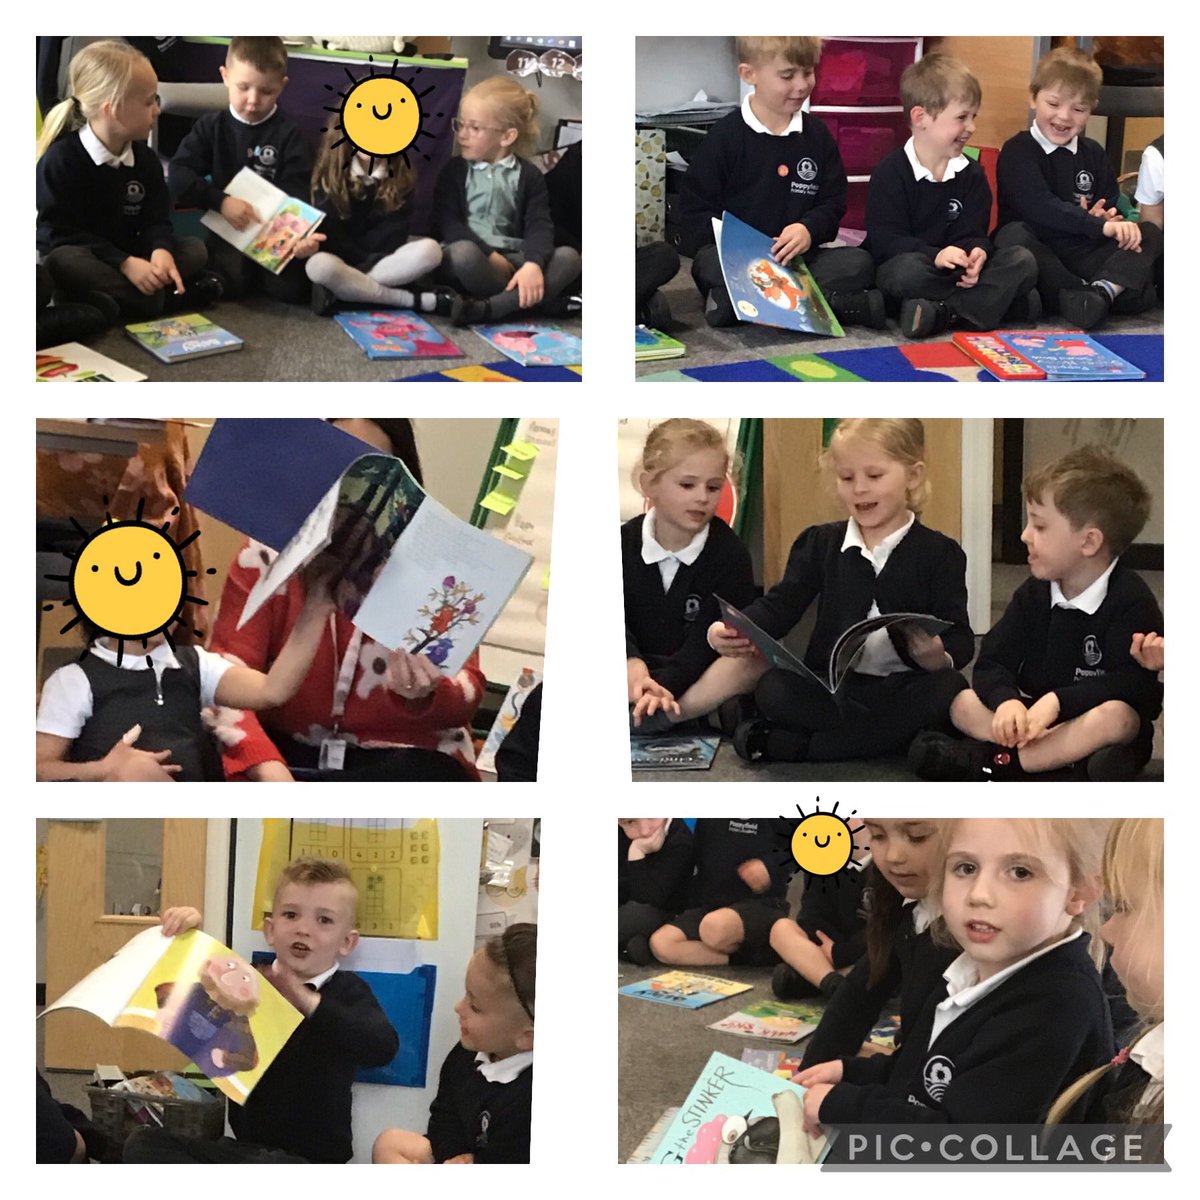 In RE, we are going to be learning at special stories. We are starting by looking at our own special stories. The children have loved showing off their books and telling each other about their favourite parts and characters. @PoppyfieldSch @MrsBytheway